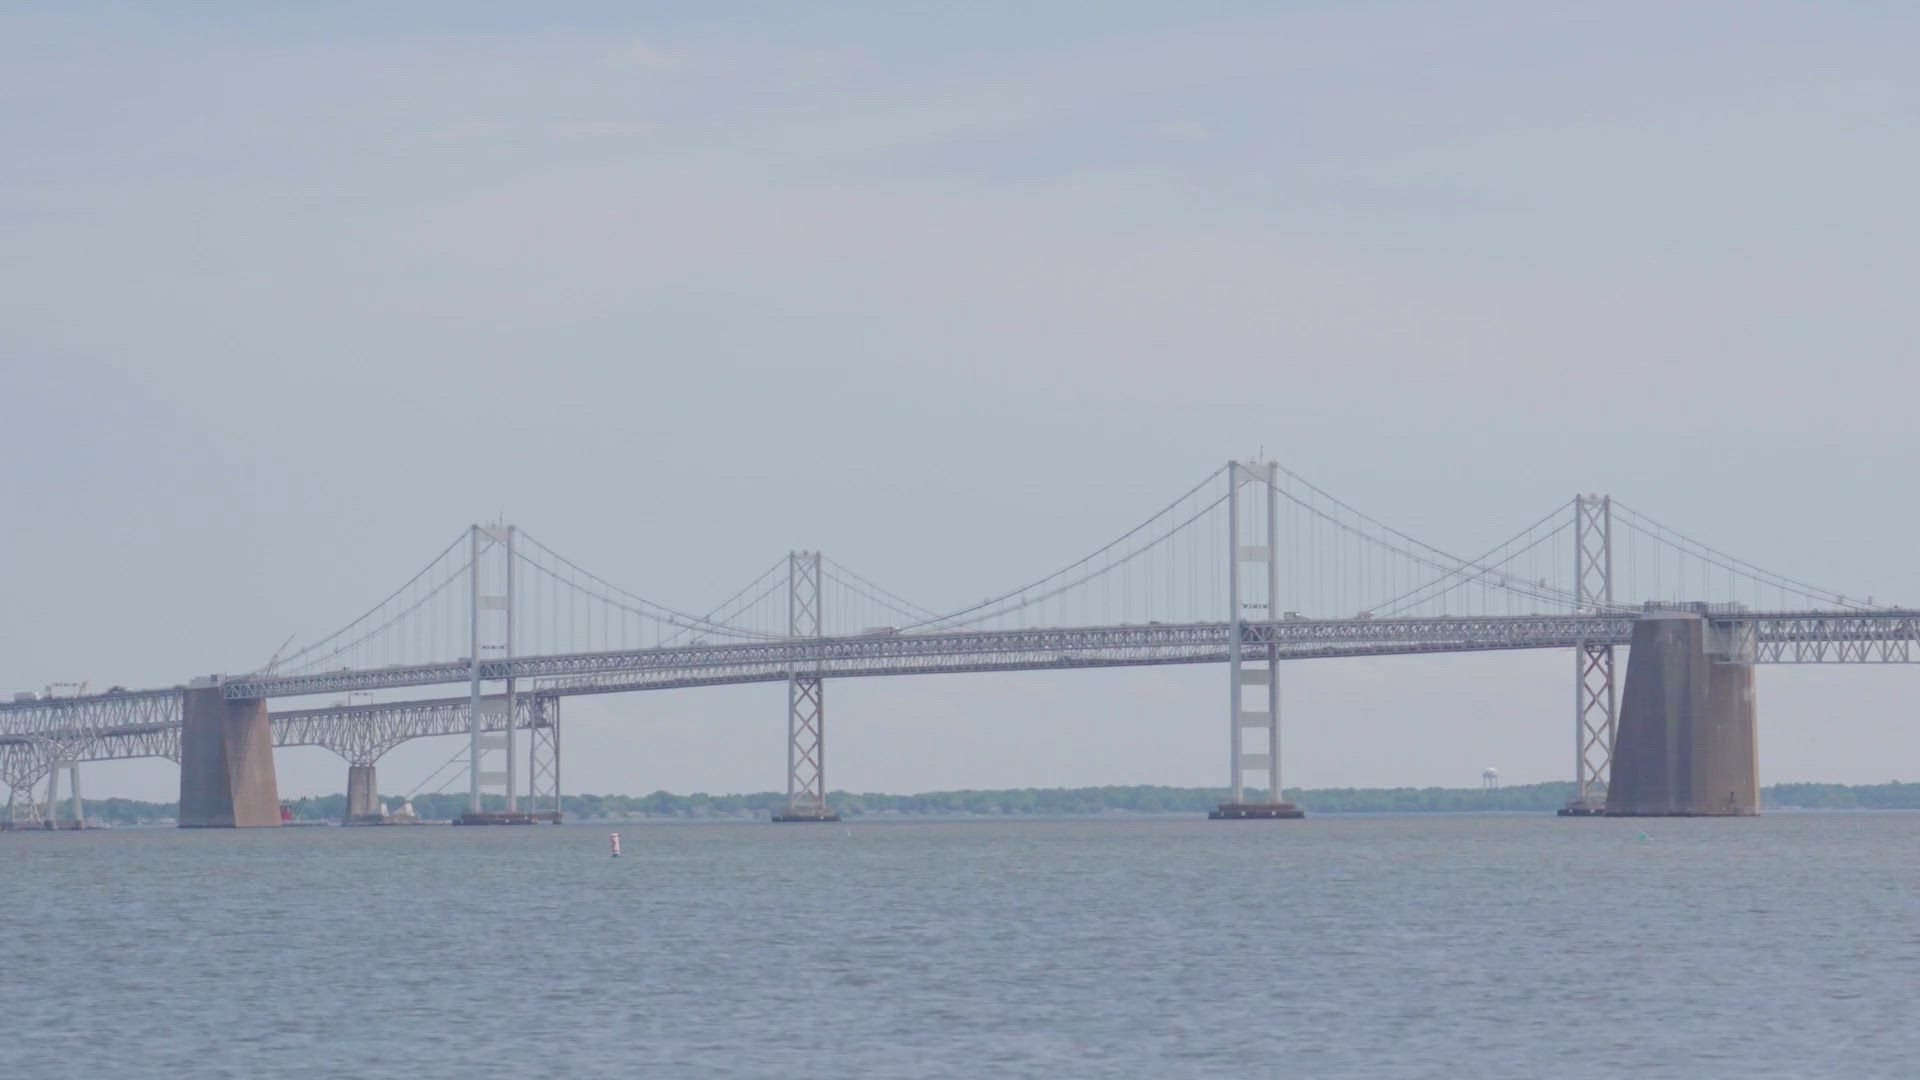 The summer season sends millions across the Chesapeake Bay Bridge. The bridge spans one of the East Coast's busiest shipping channels.